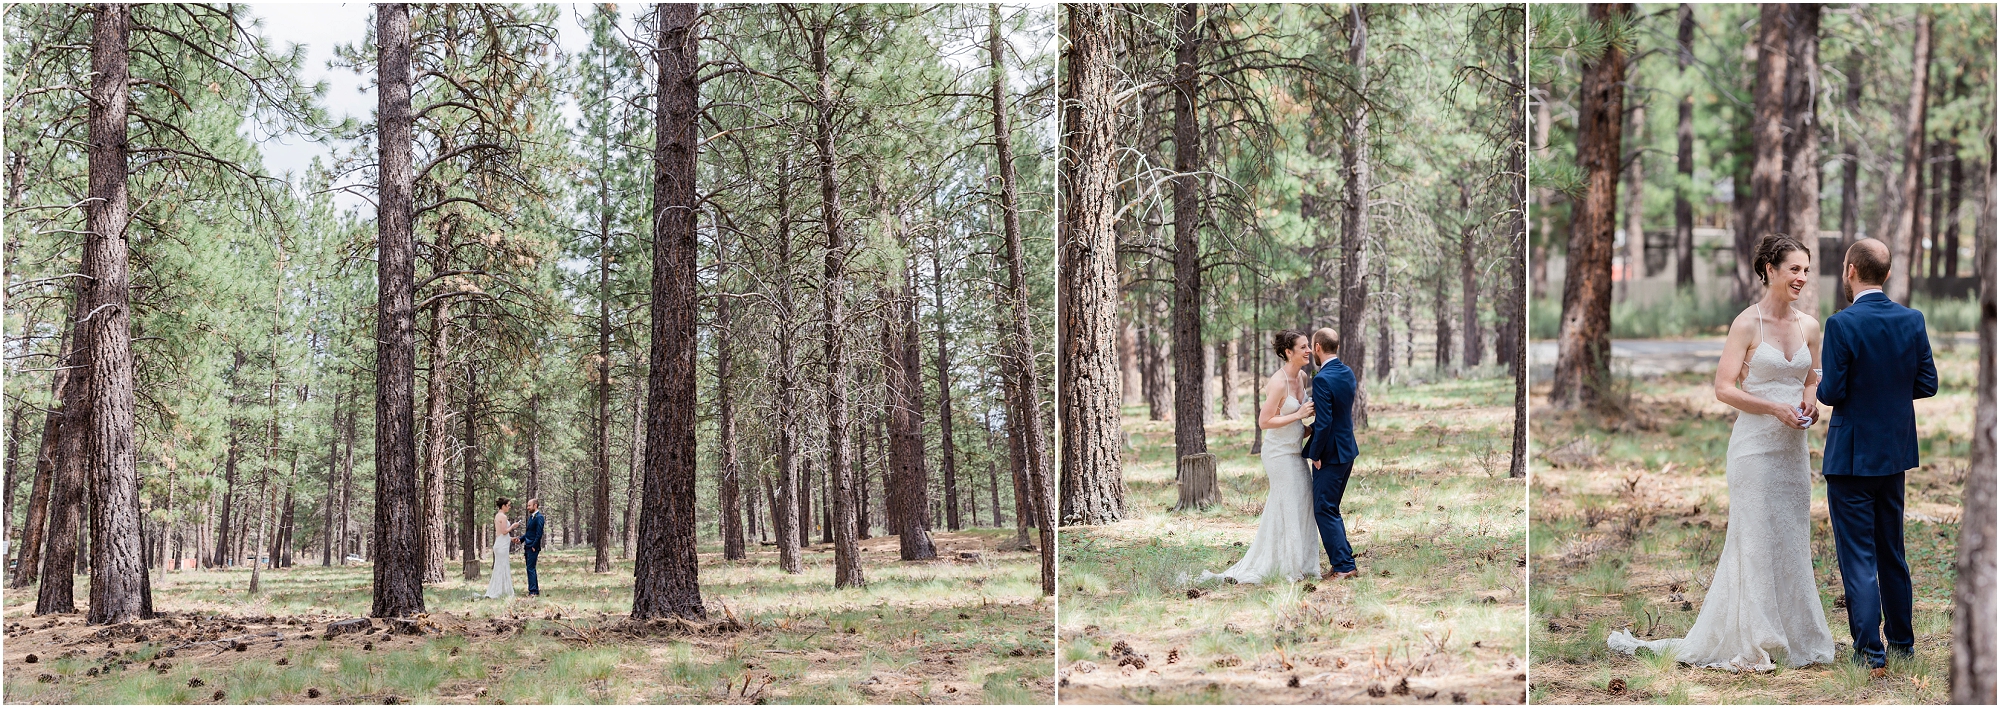 A first look for a lovely Central Oregon bride and groom at the High Desert Museum in Bend. | Erica Swantek Photography